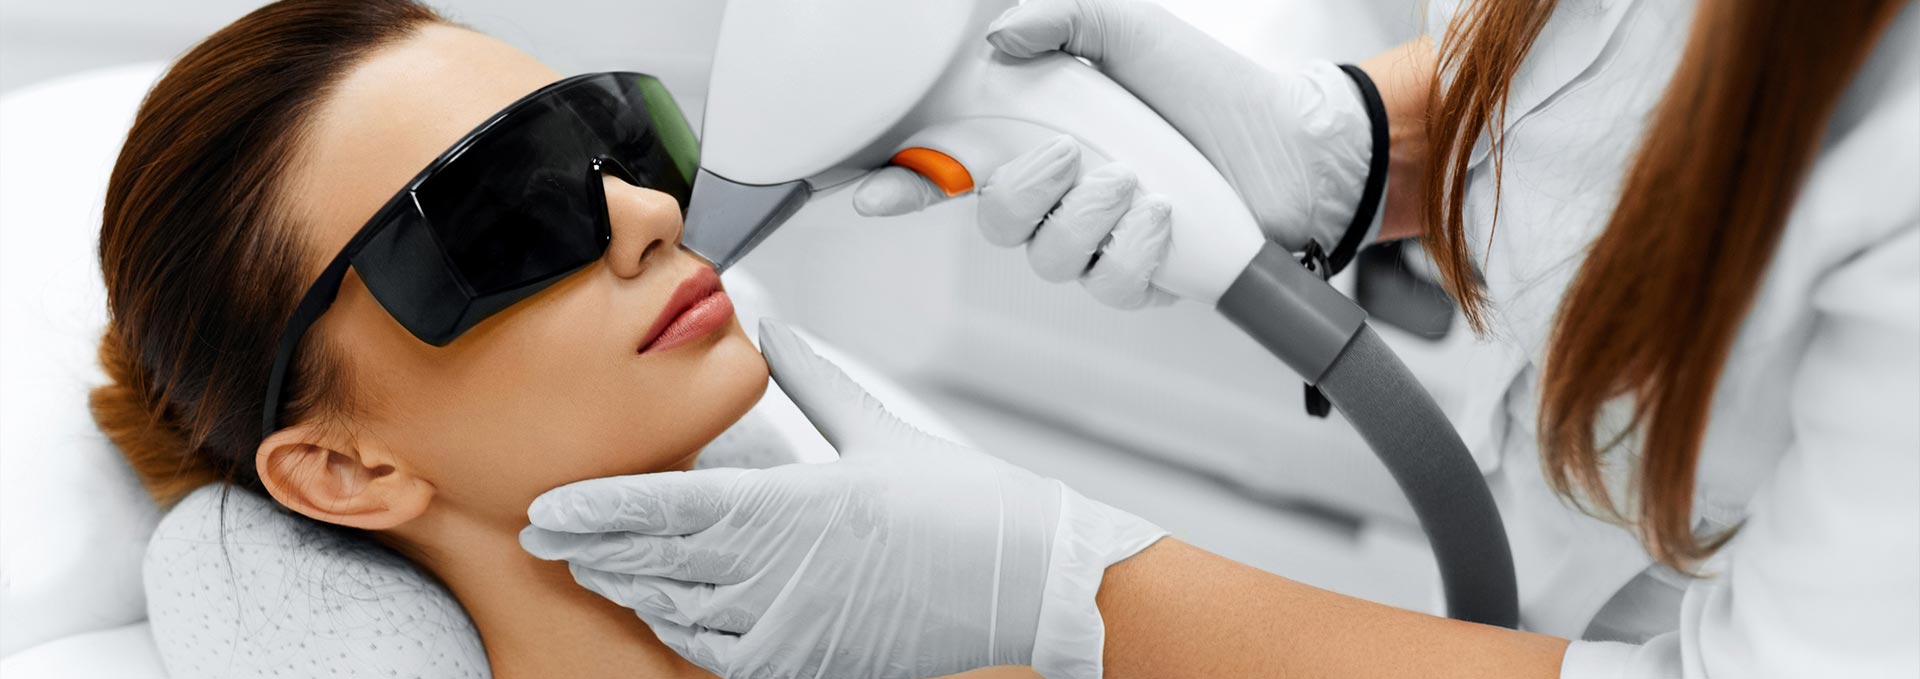 Laser hair removal - United Medical and Aesthetics